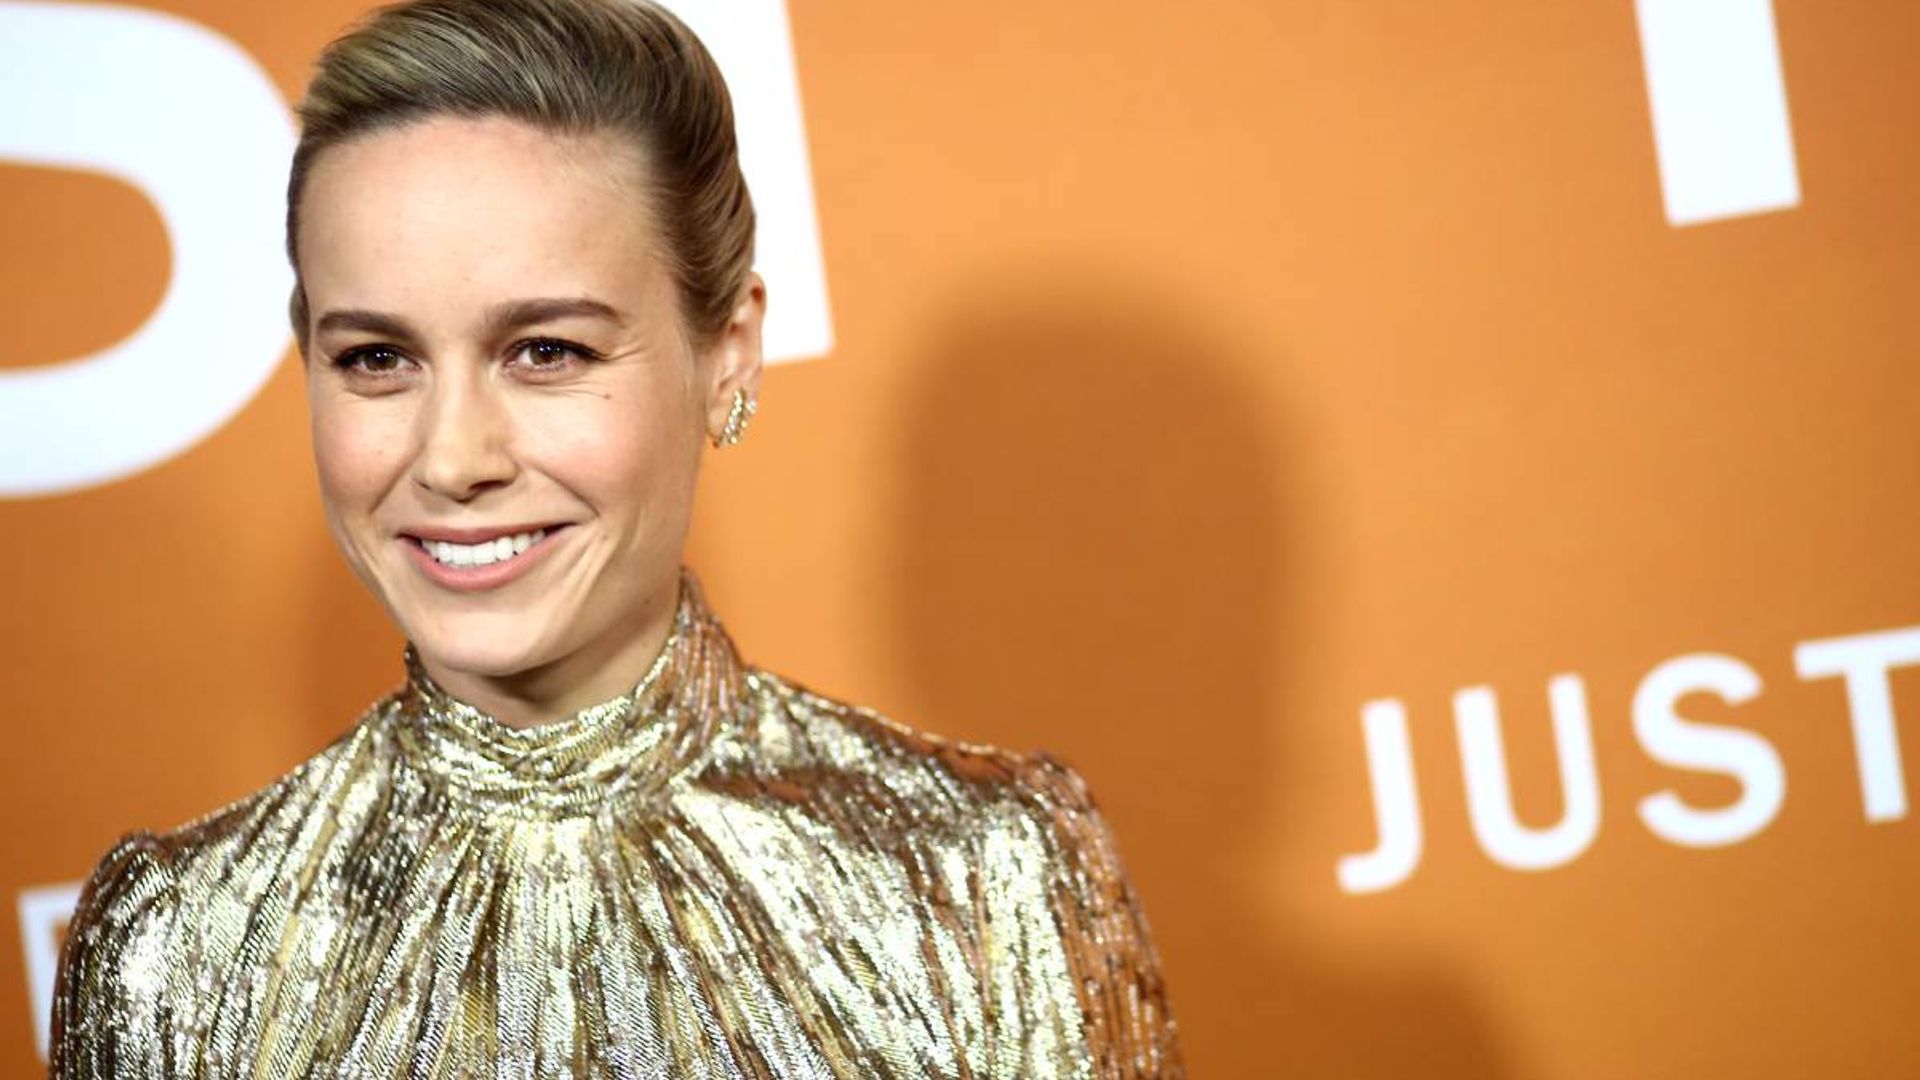 Brie Larson makes fans swoon with the coziest photo in bed